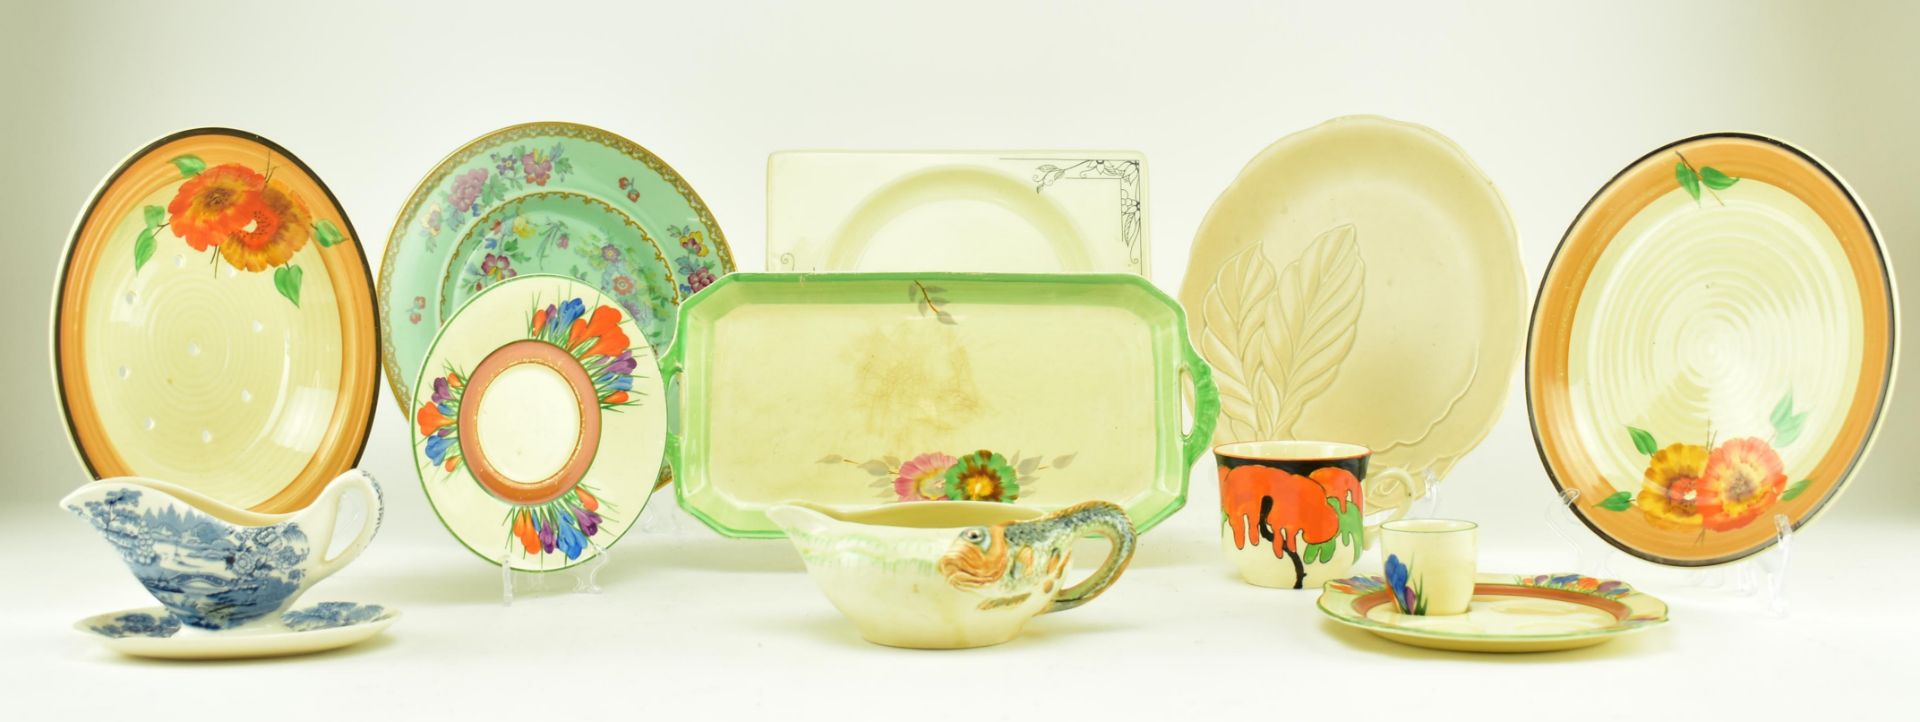 CLARICE CLIFF - COLLECTION OF EARLY - MID CENTURY CERAMICS